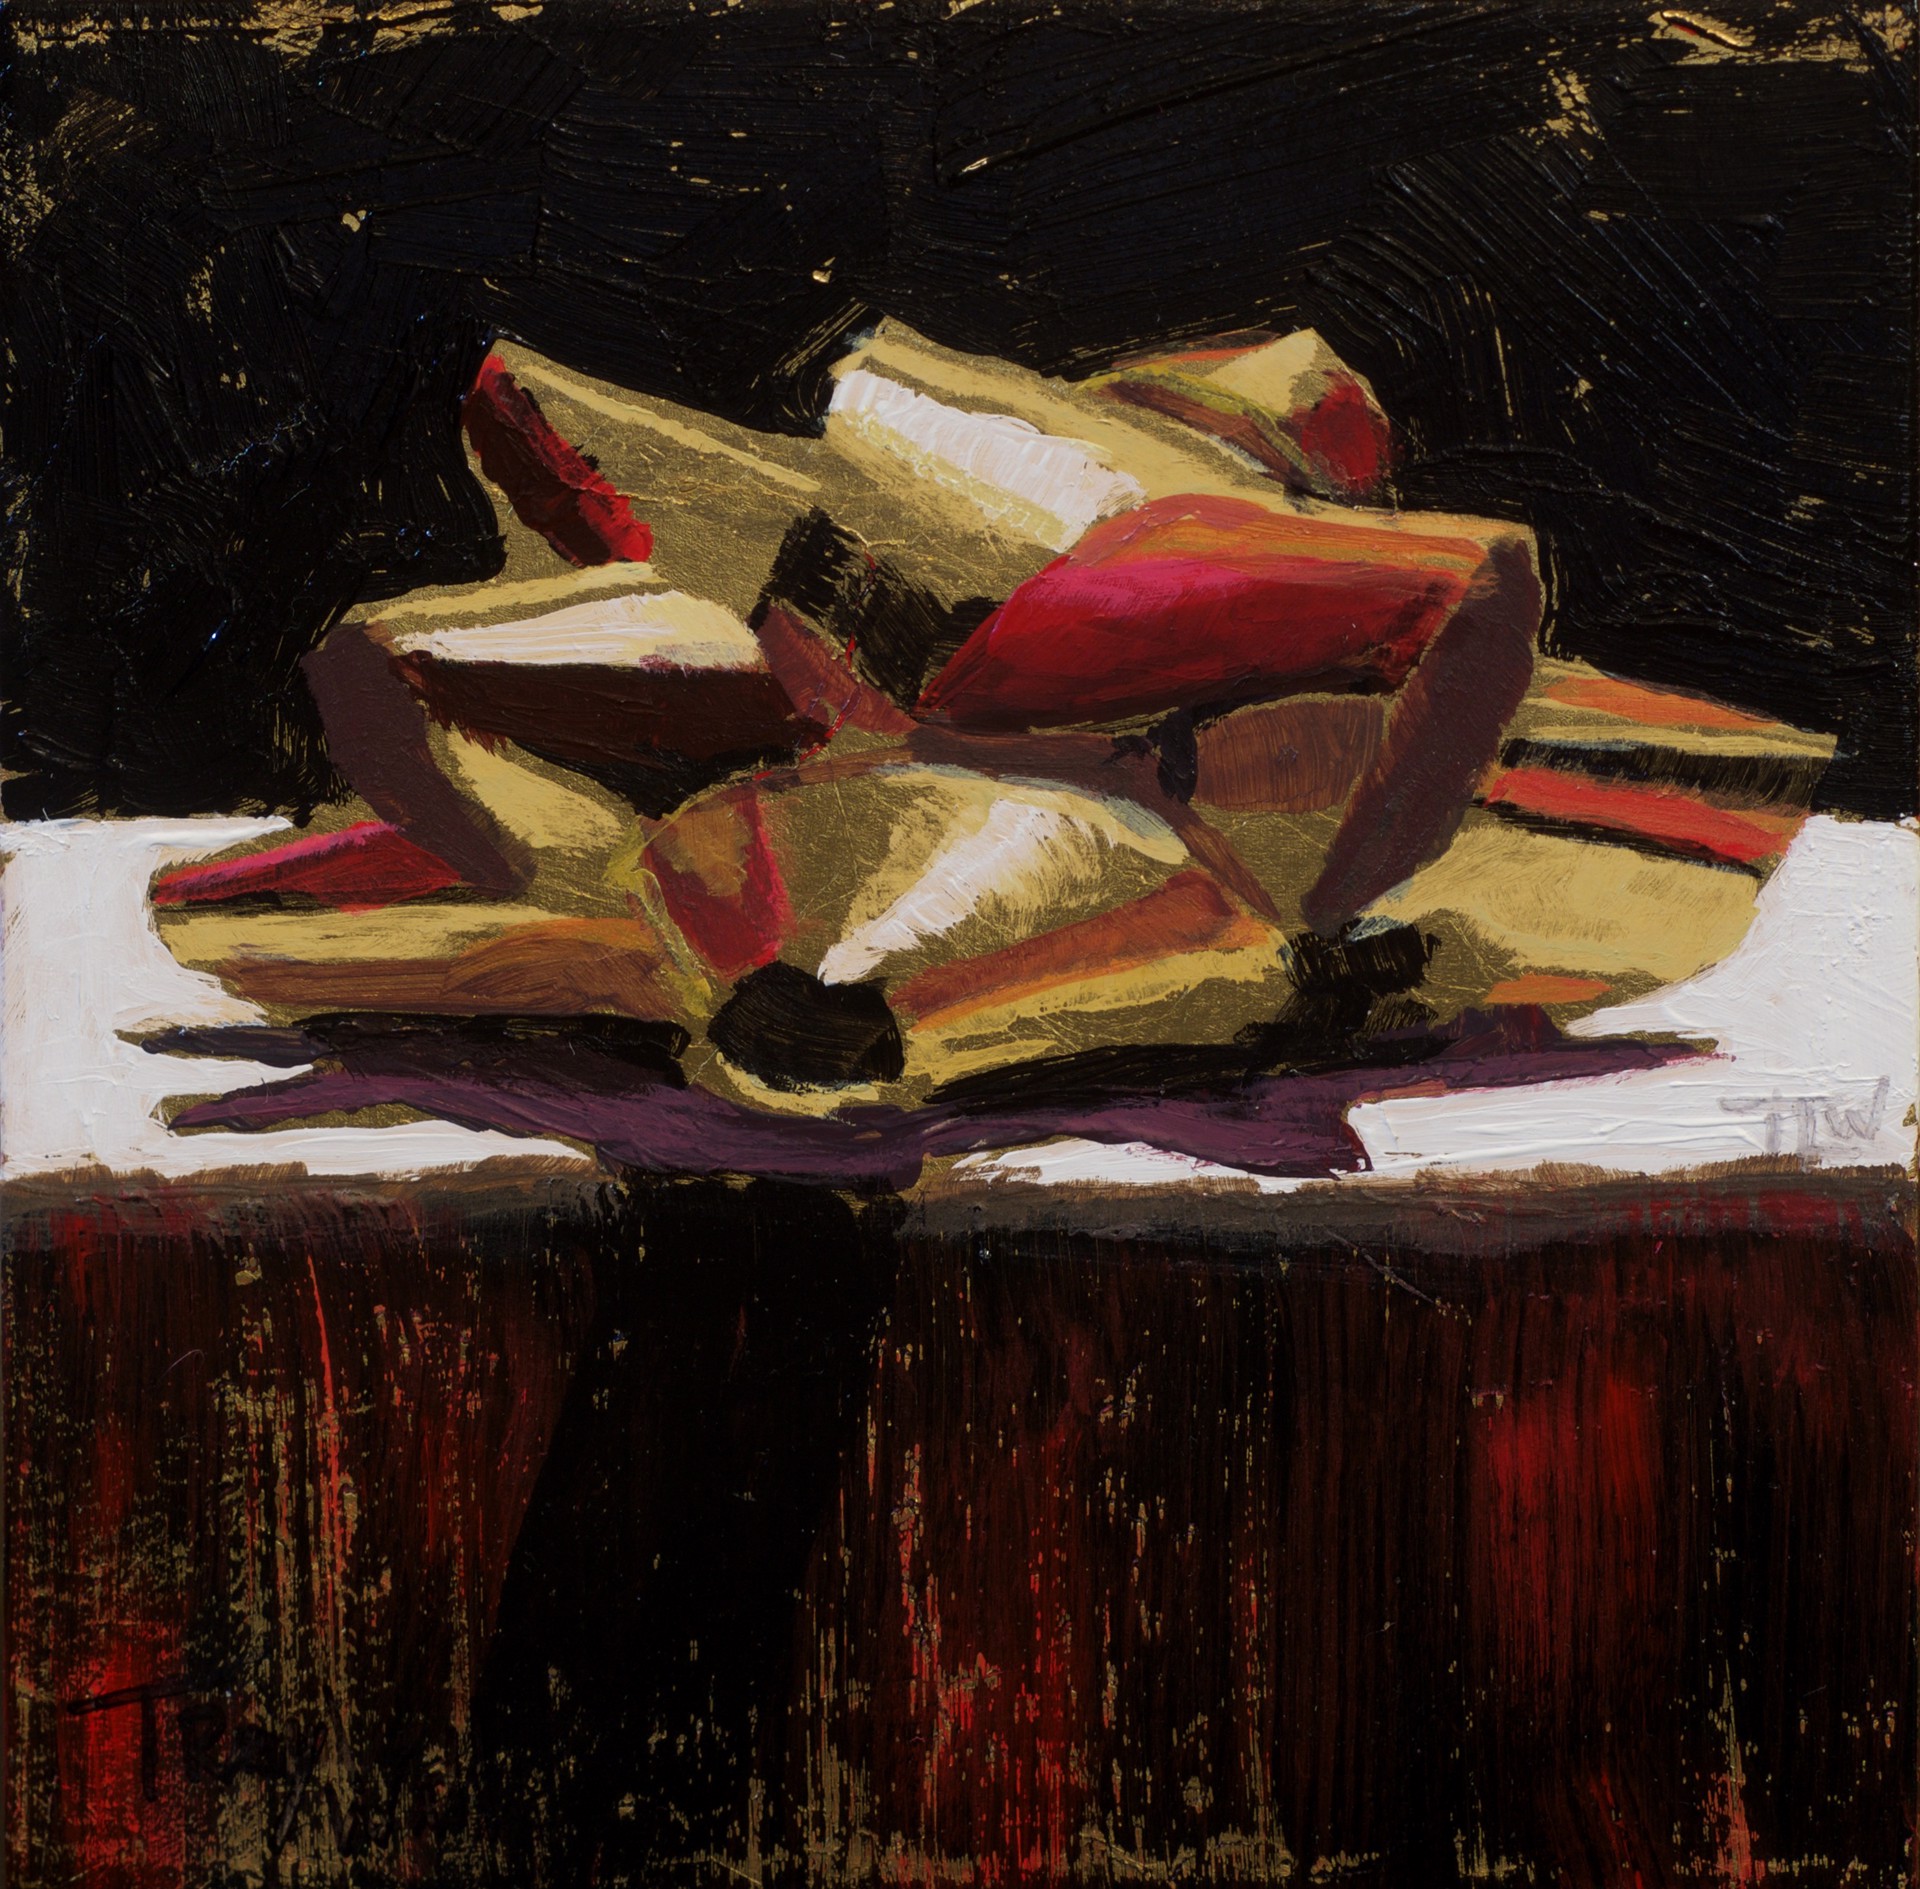 Tracy Wall - Gift of Gold mixed media - 5 x 5 in $250.00